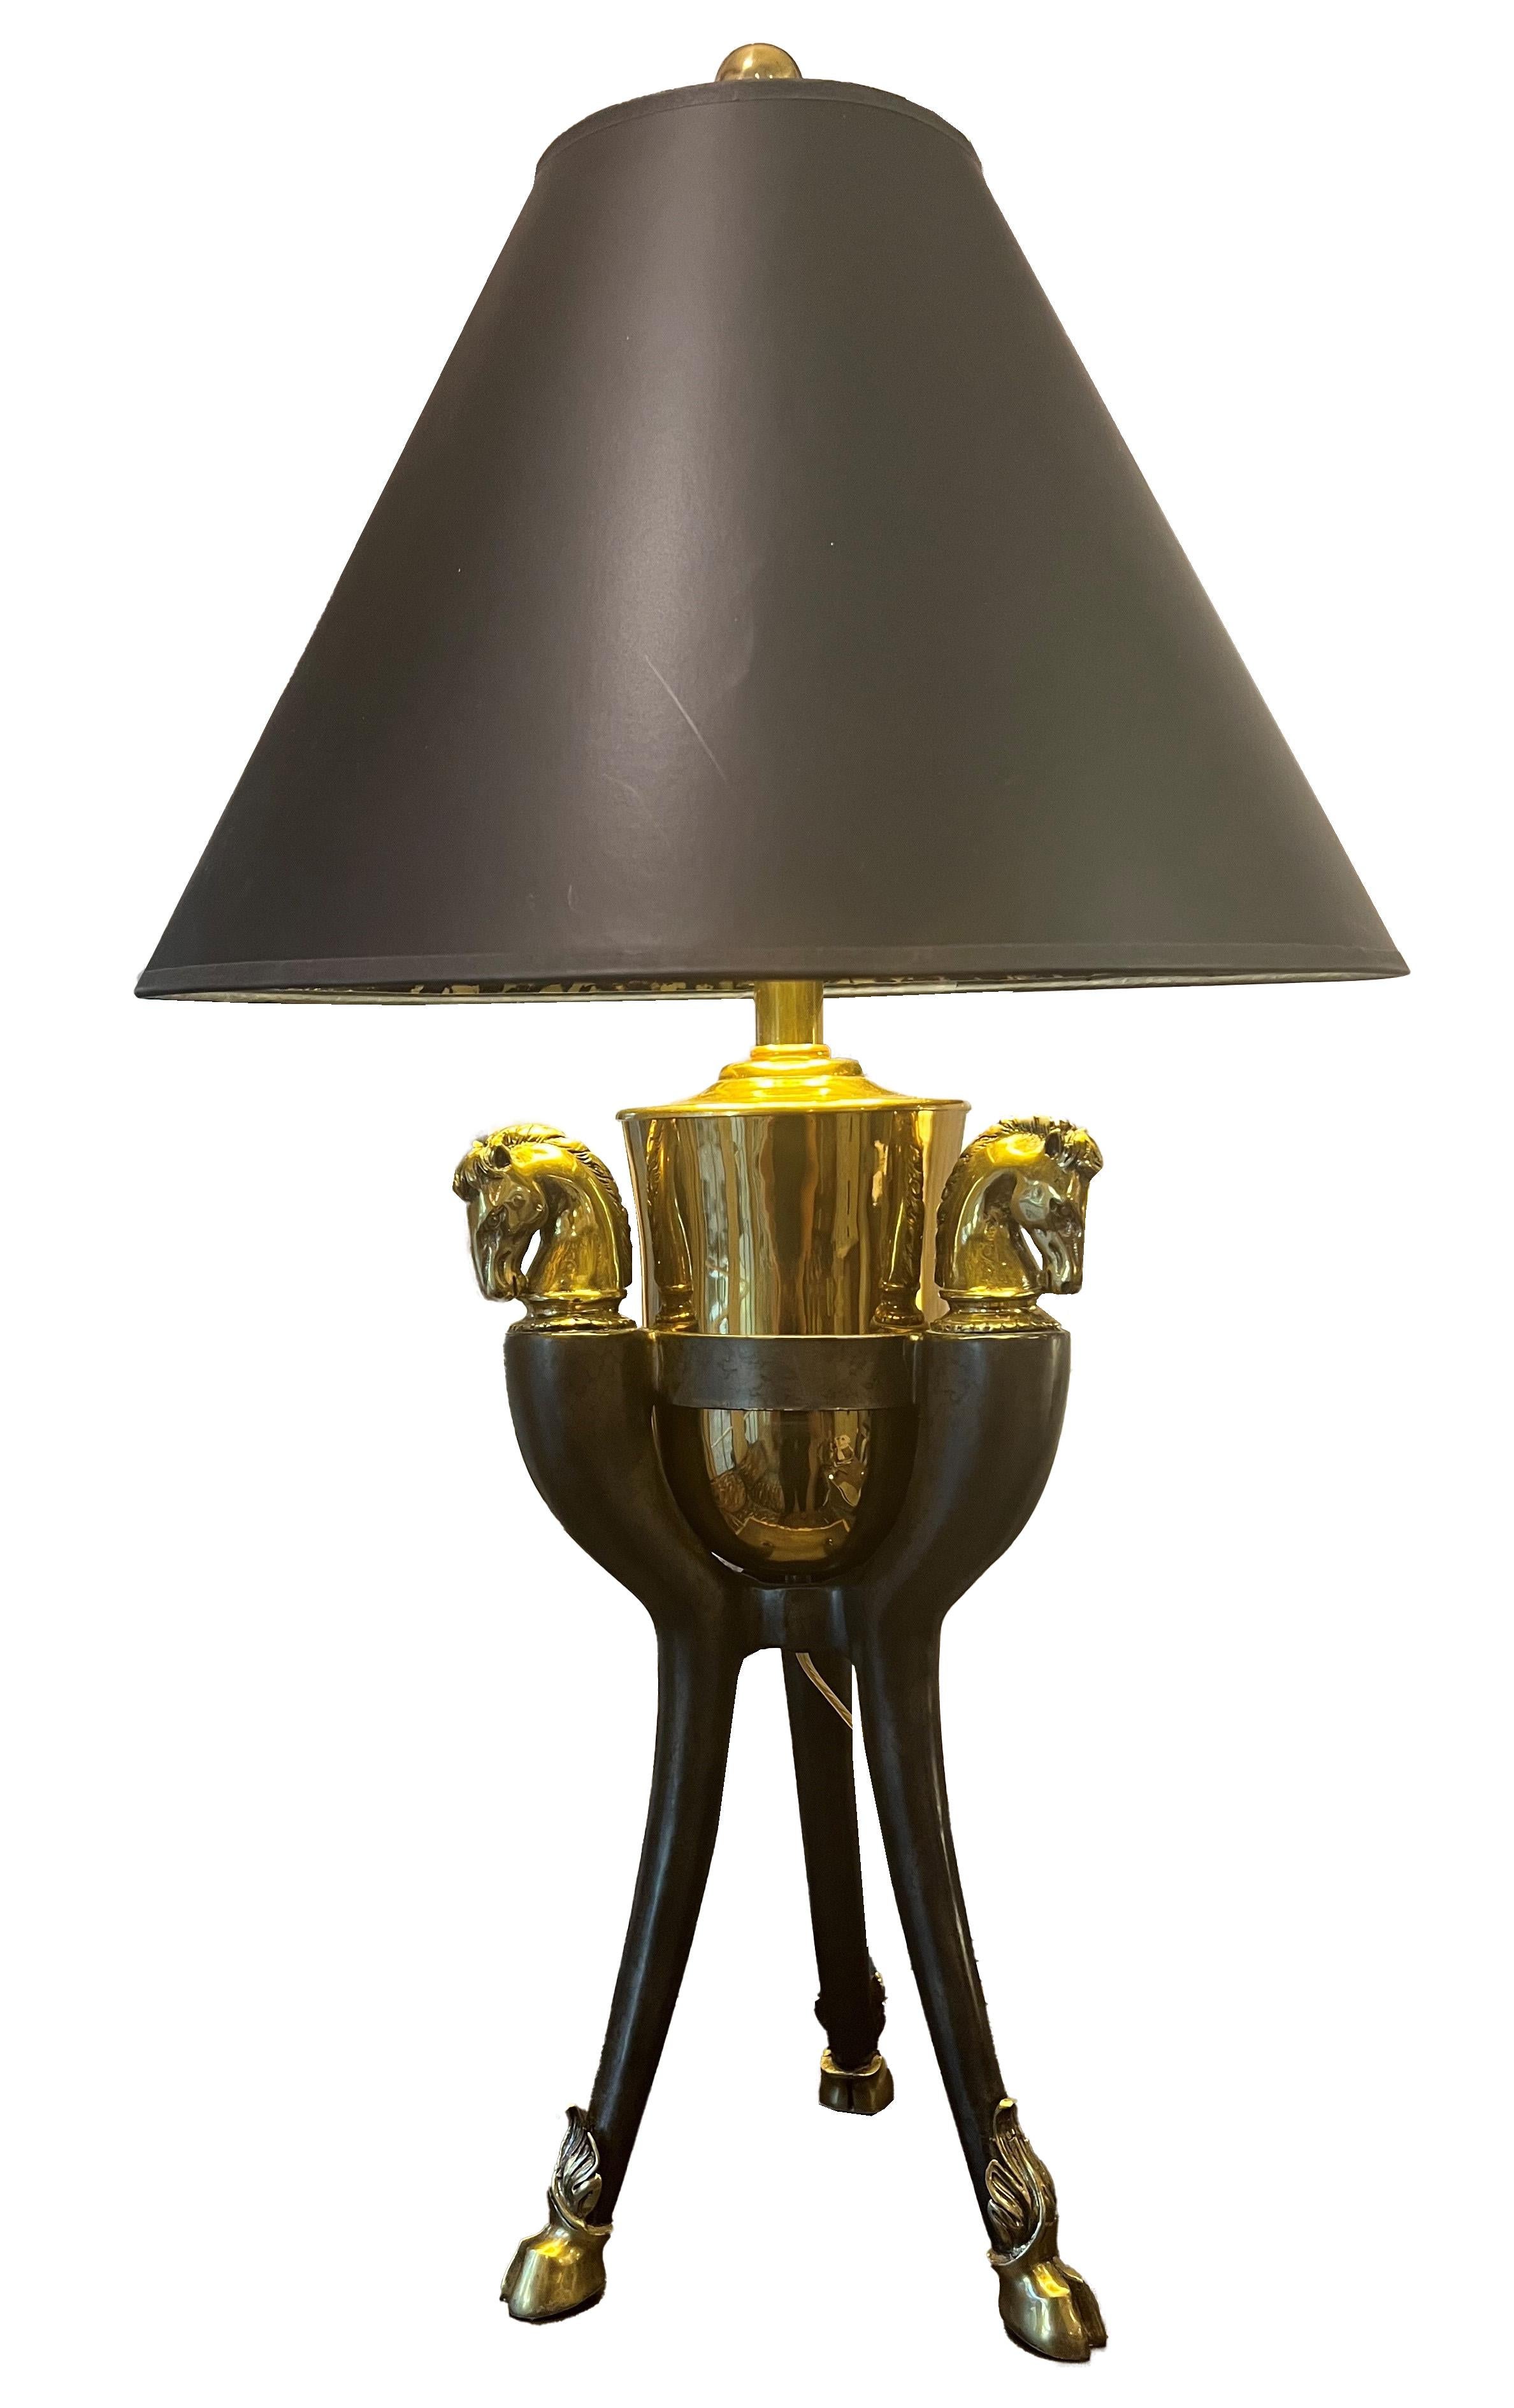 Immerse your space in the allure of the Art Deco era with this unique Equestrian Table Lamp, a striking fusion of sophistication and equine-inspired design. The brass horse heads and hoofs motifs form an exquisite base. Topped with a black paper